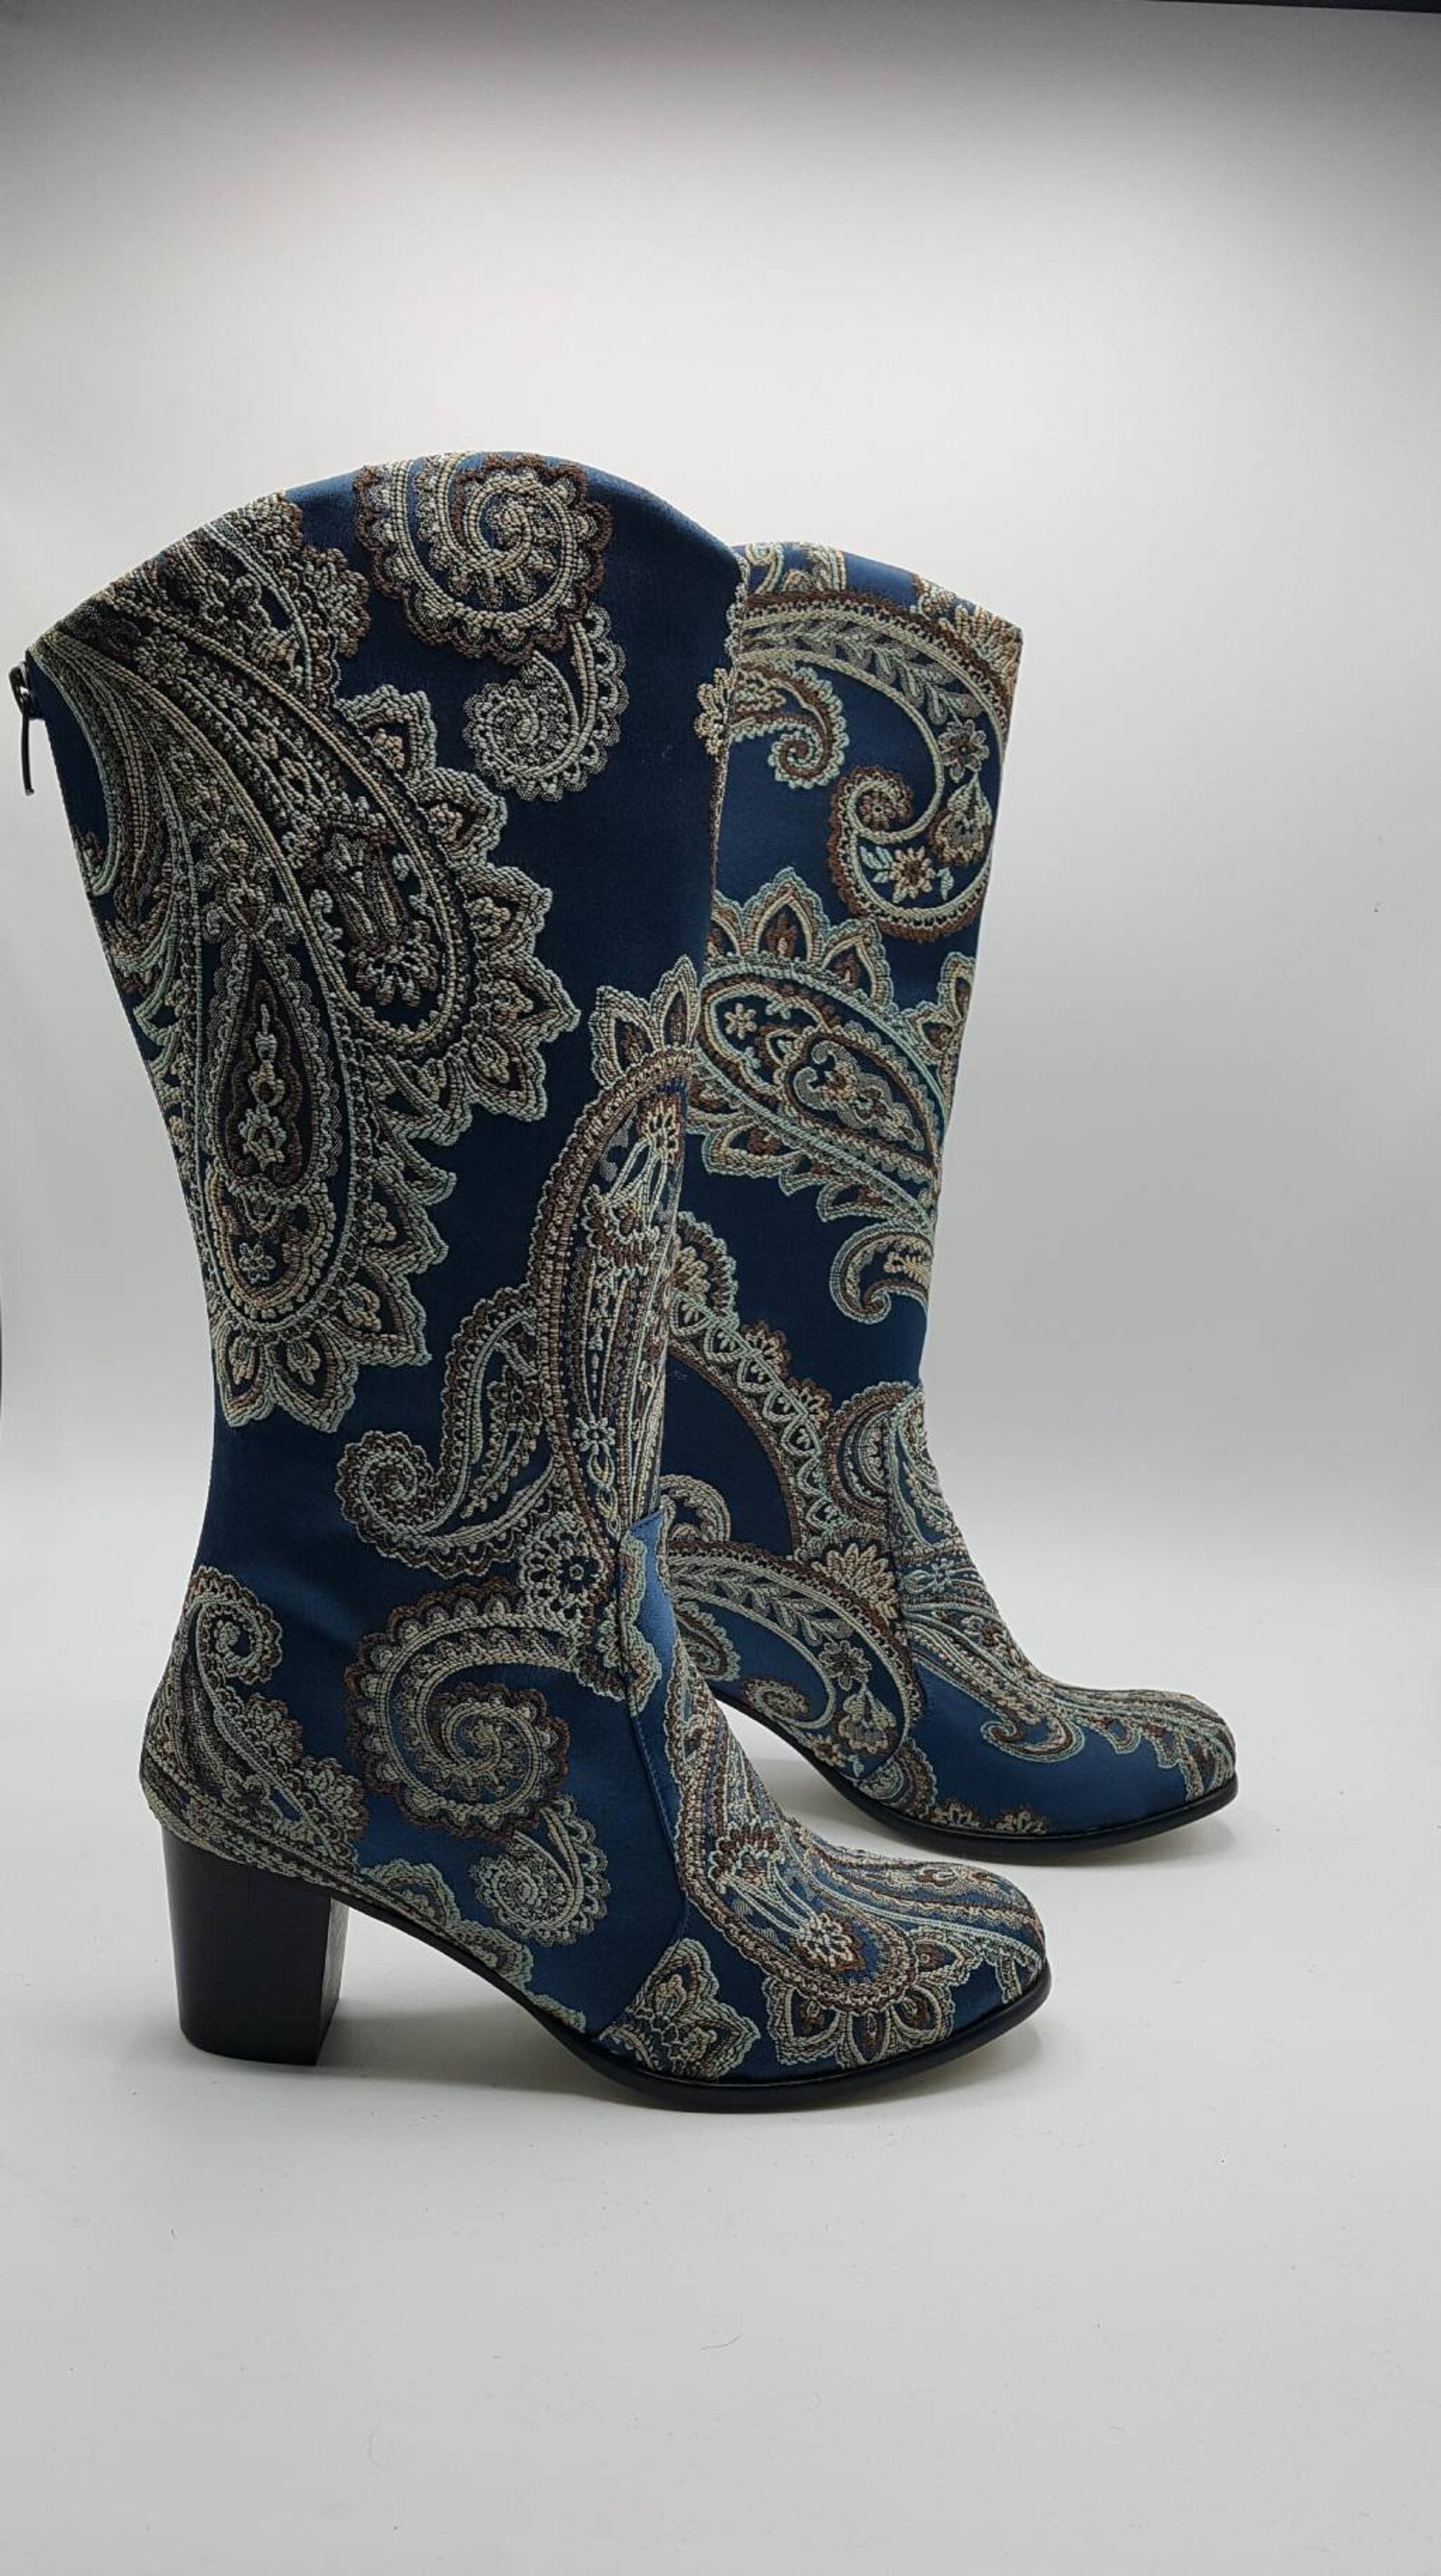 Women's Boots Custom Boots Tapestry Boots. Platform | Etsy